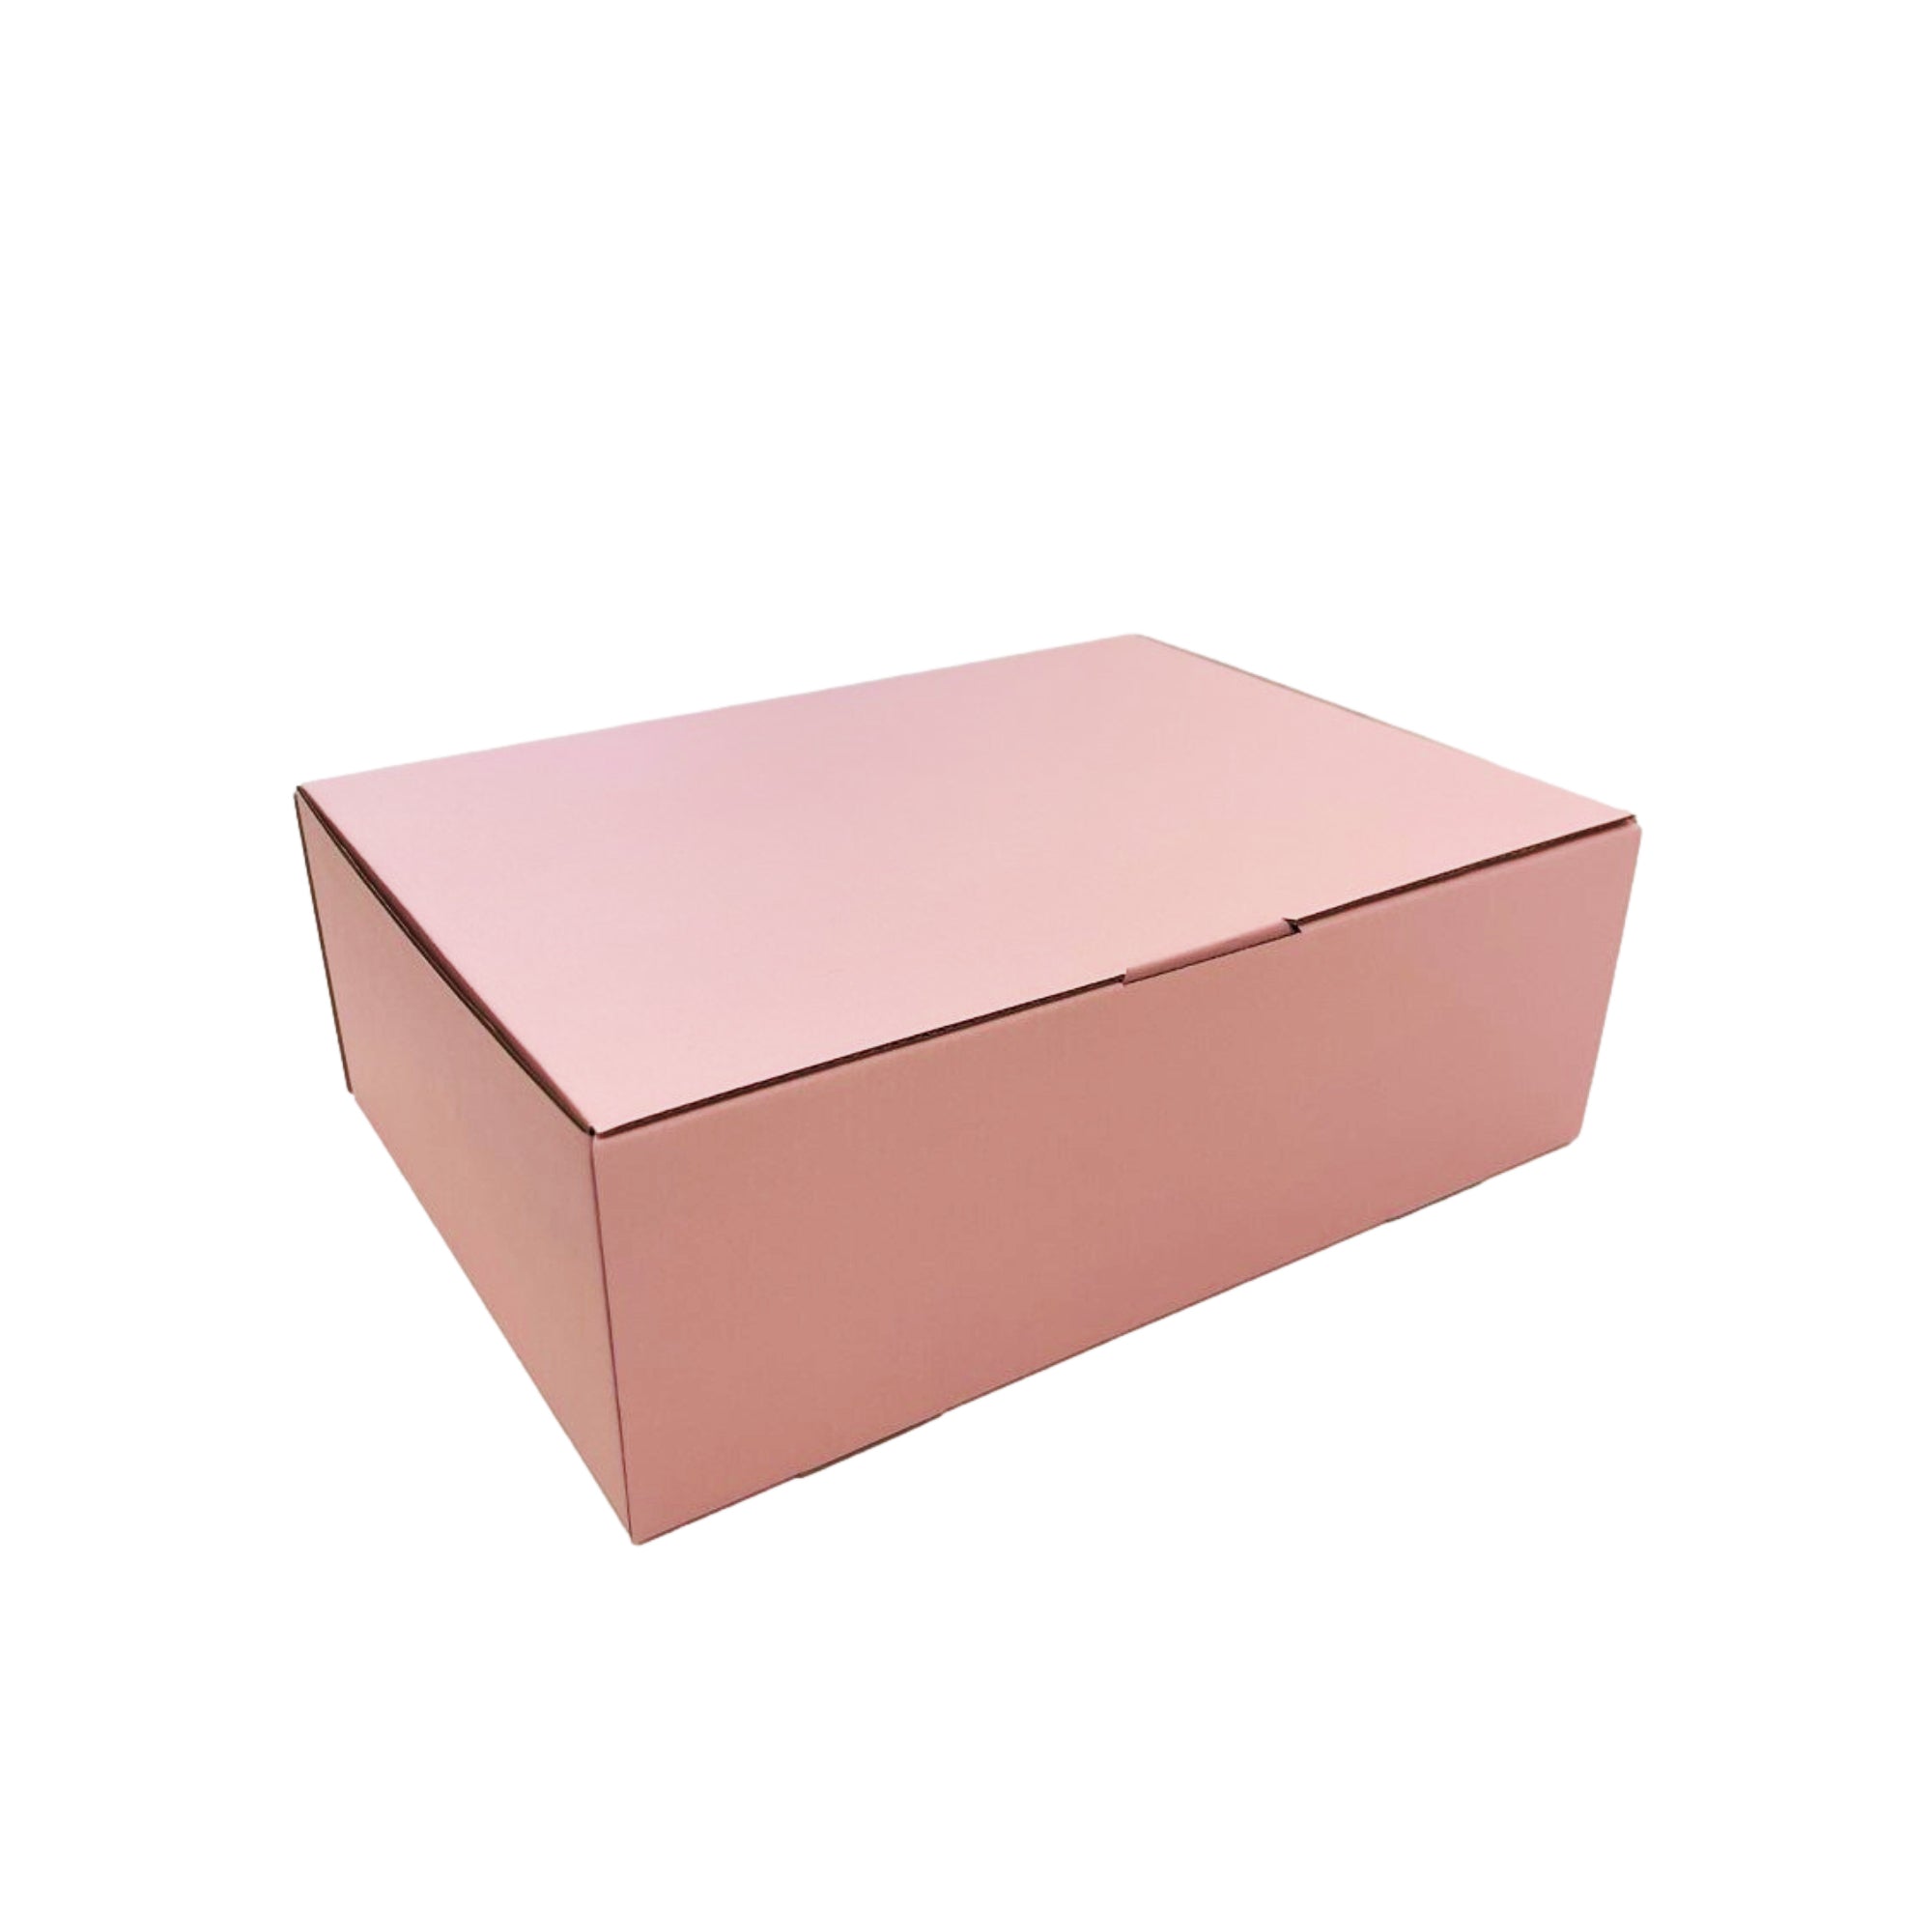 Pink Gift Box 310 x 220 x 105mm [Mailing Boxes] [Light Rose]